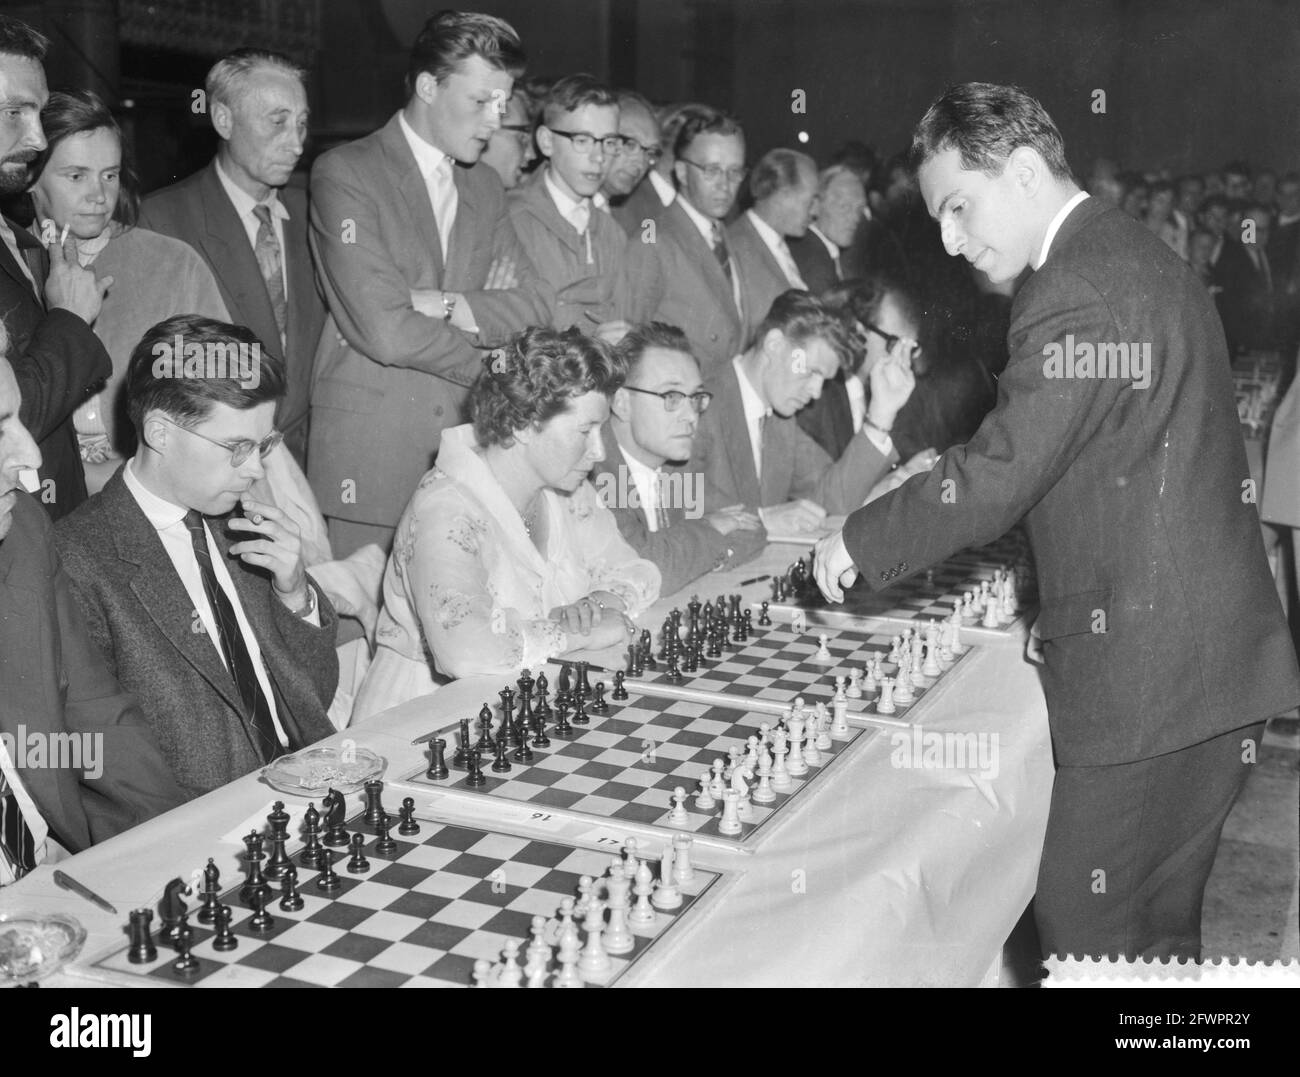 Remembering Milan Momic, the refugee who became Alabama's first chess master